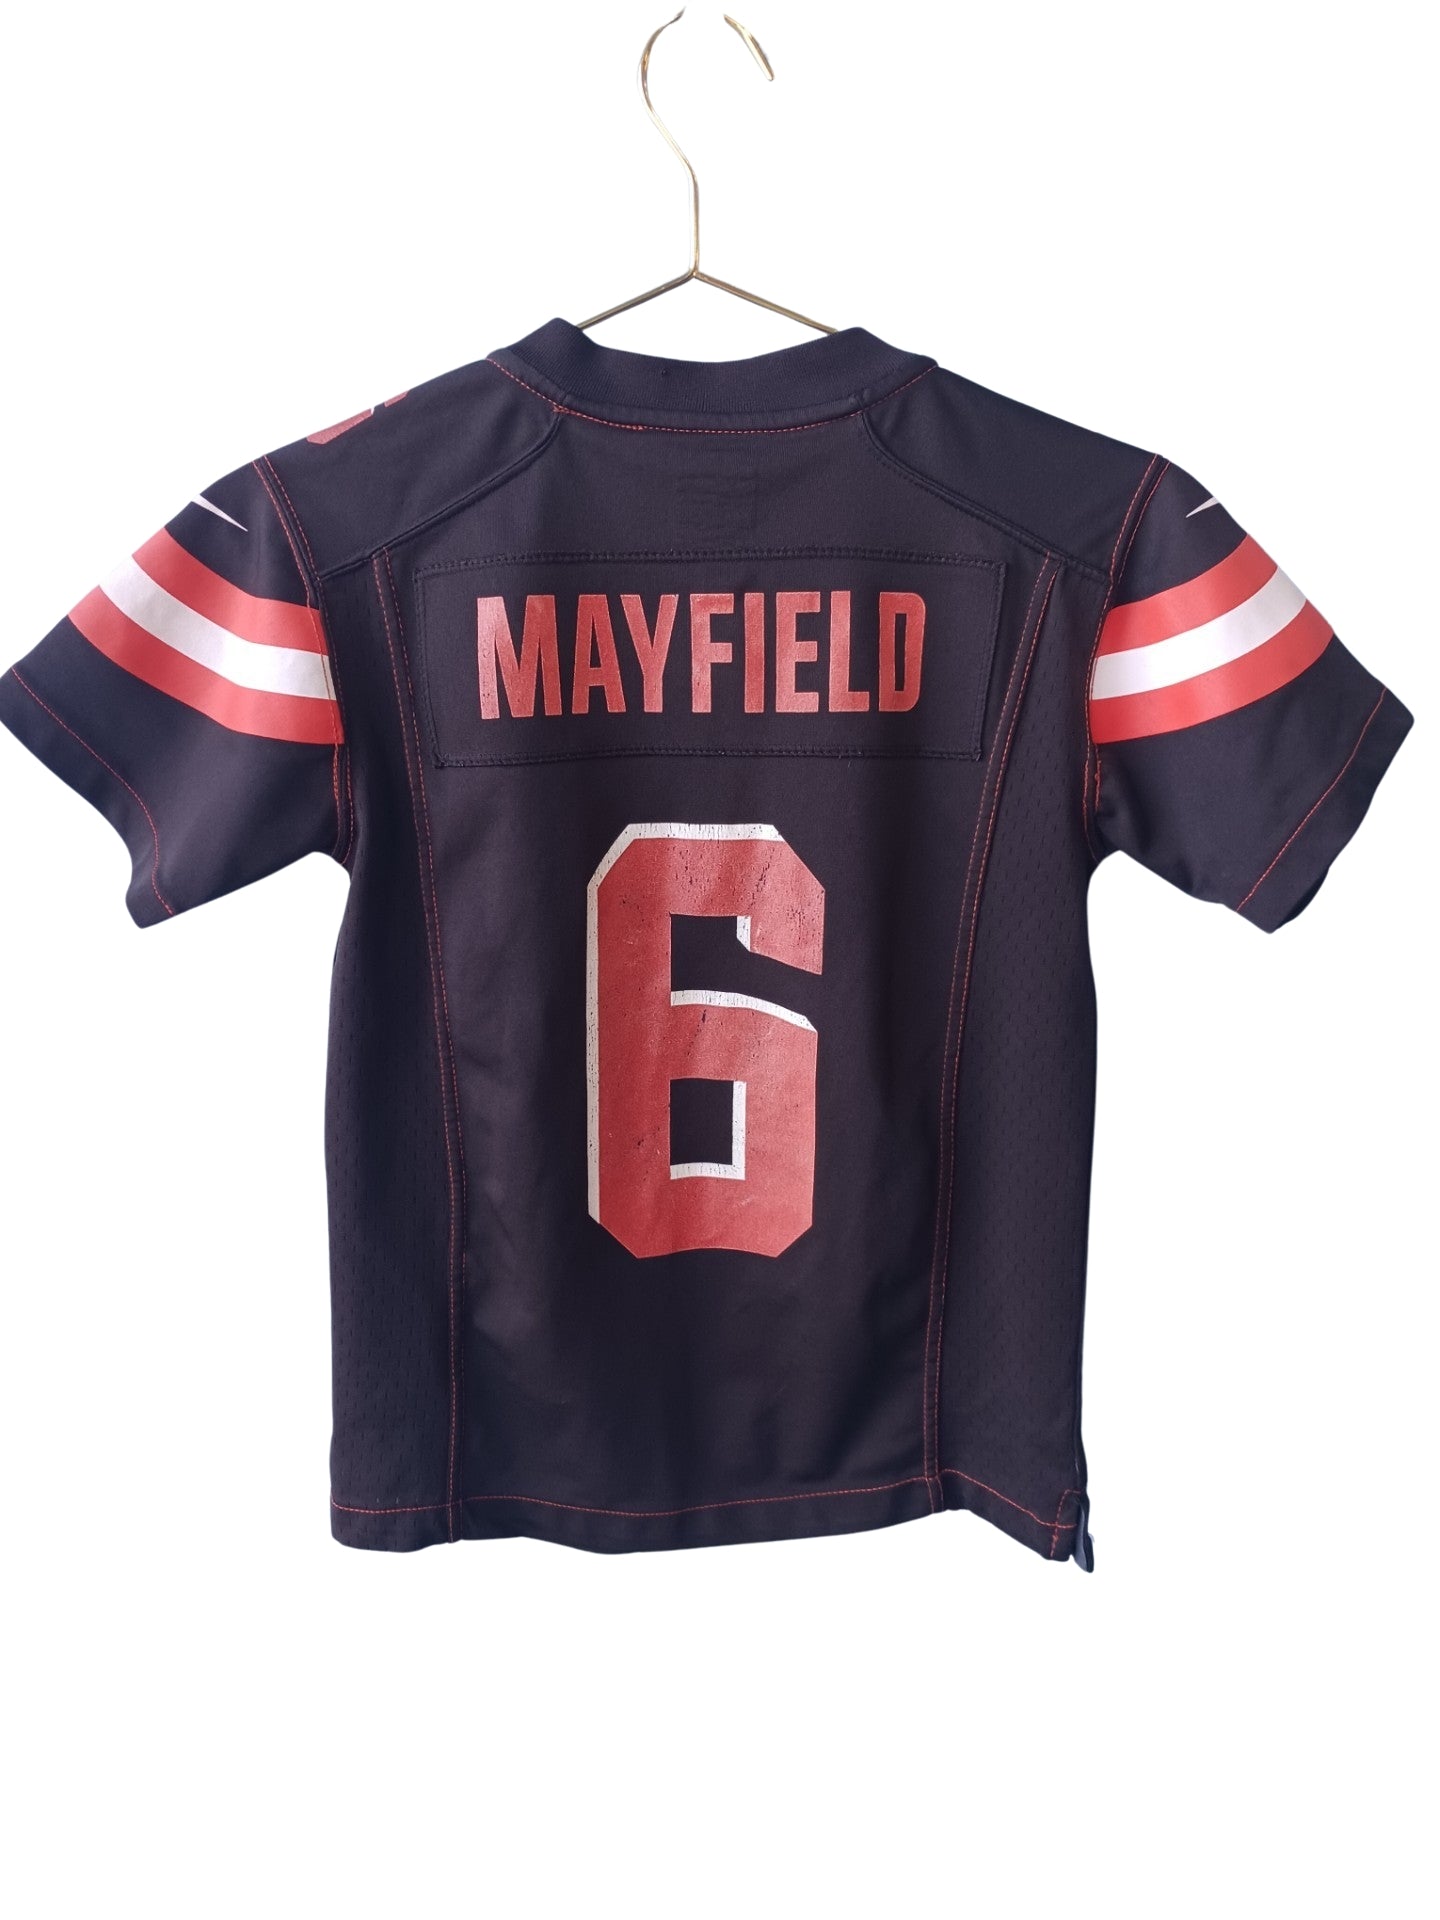 Womens NFL Team Cleveland Browns Baker Mayfield Jersey, Size Small